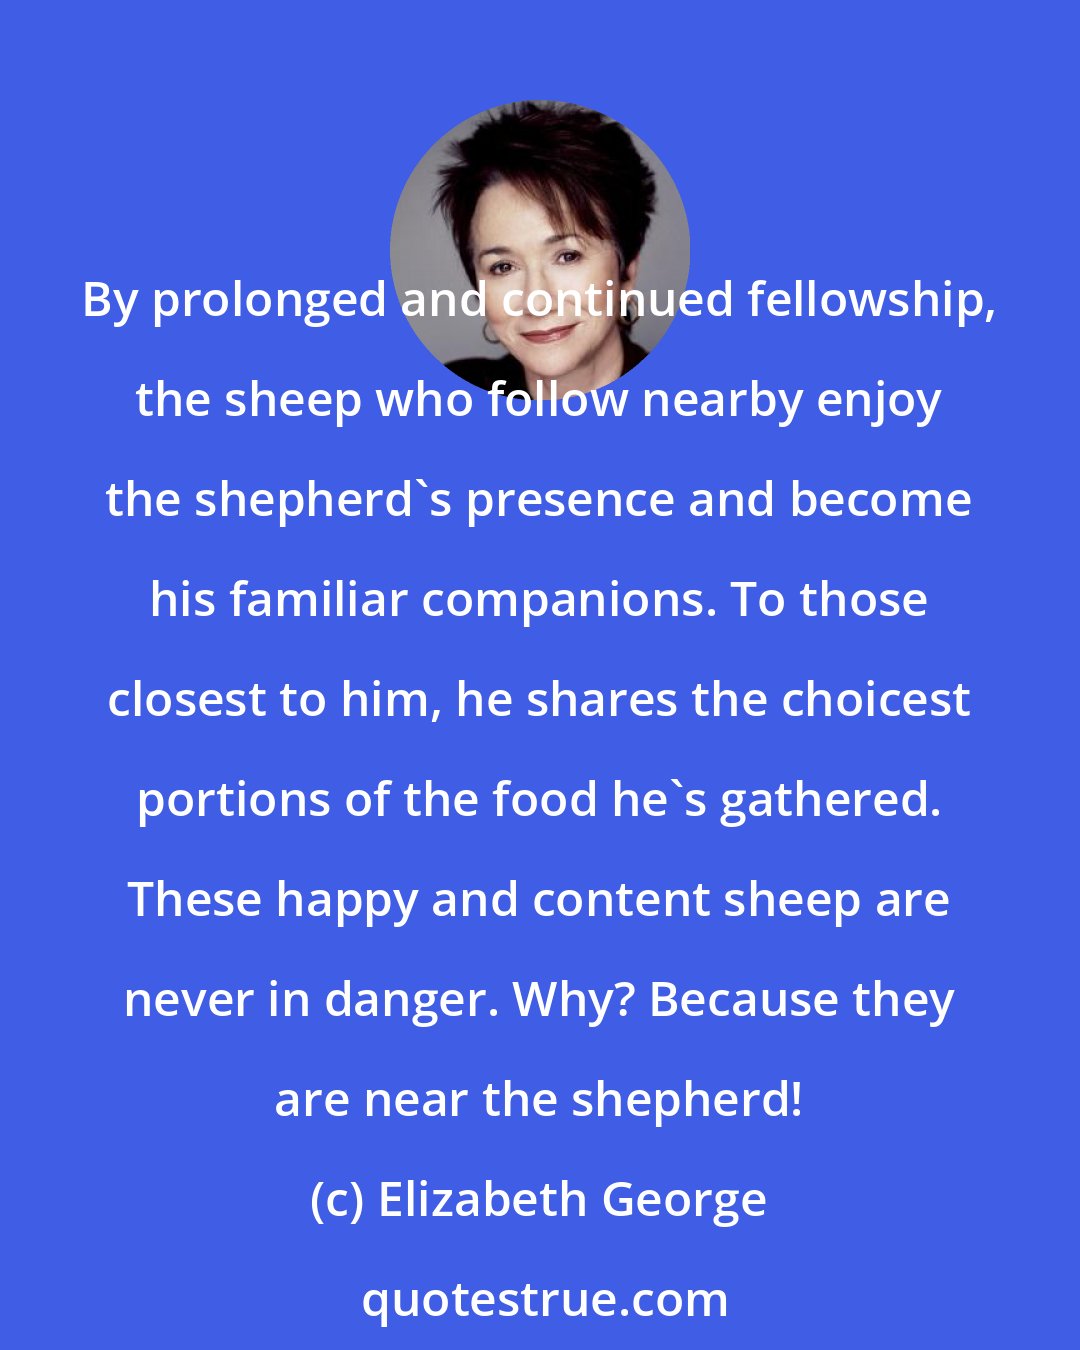 Elizabeth George: By prolonged and continued fellowship, the sheep who follow nearby enjoy the shepherd's presence and become his familiar companions. To those closest to him, he shares the choicest portions of the food he's gathered. These happy and content sheep are never in danger. Why? Because they are near the shepherd!